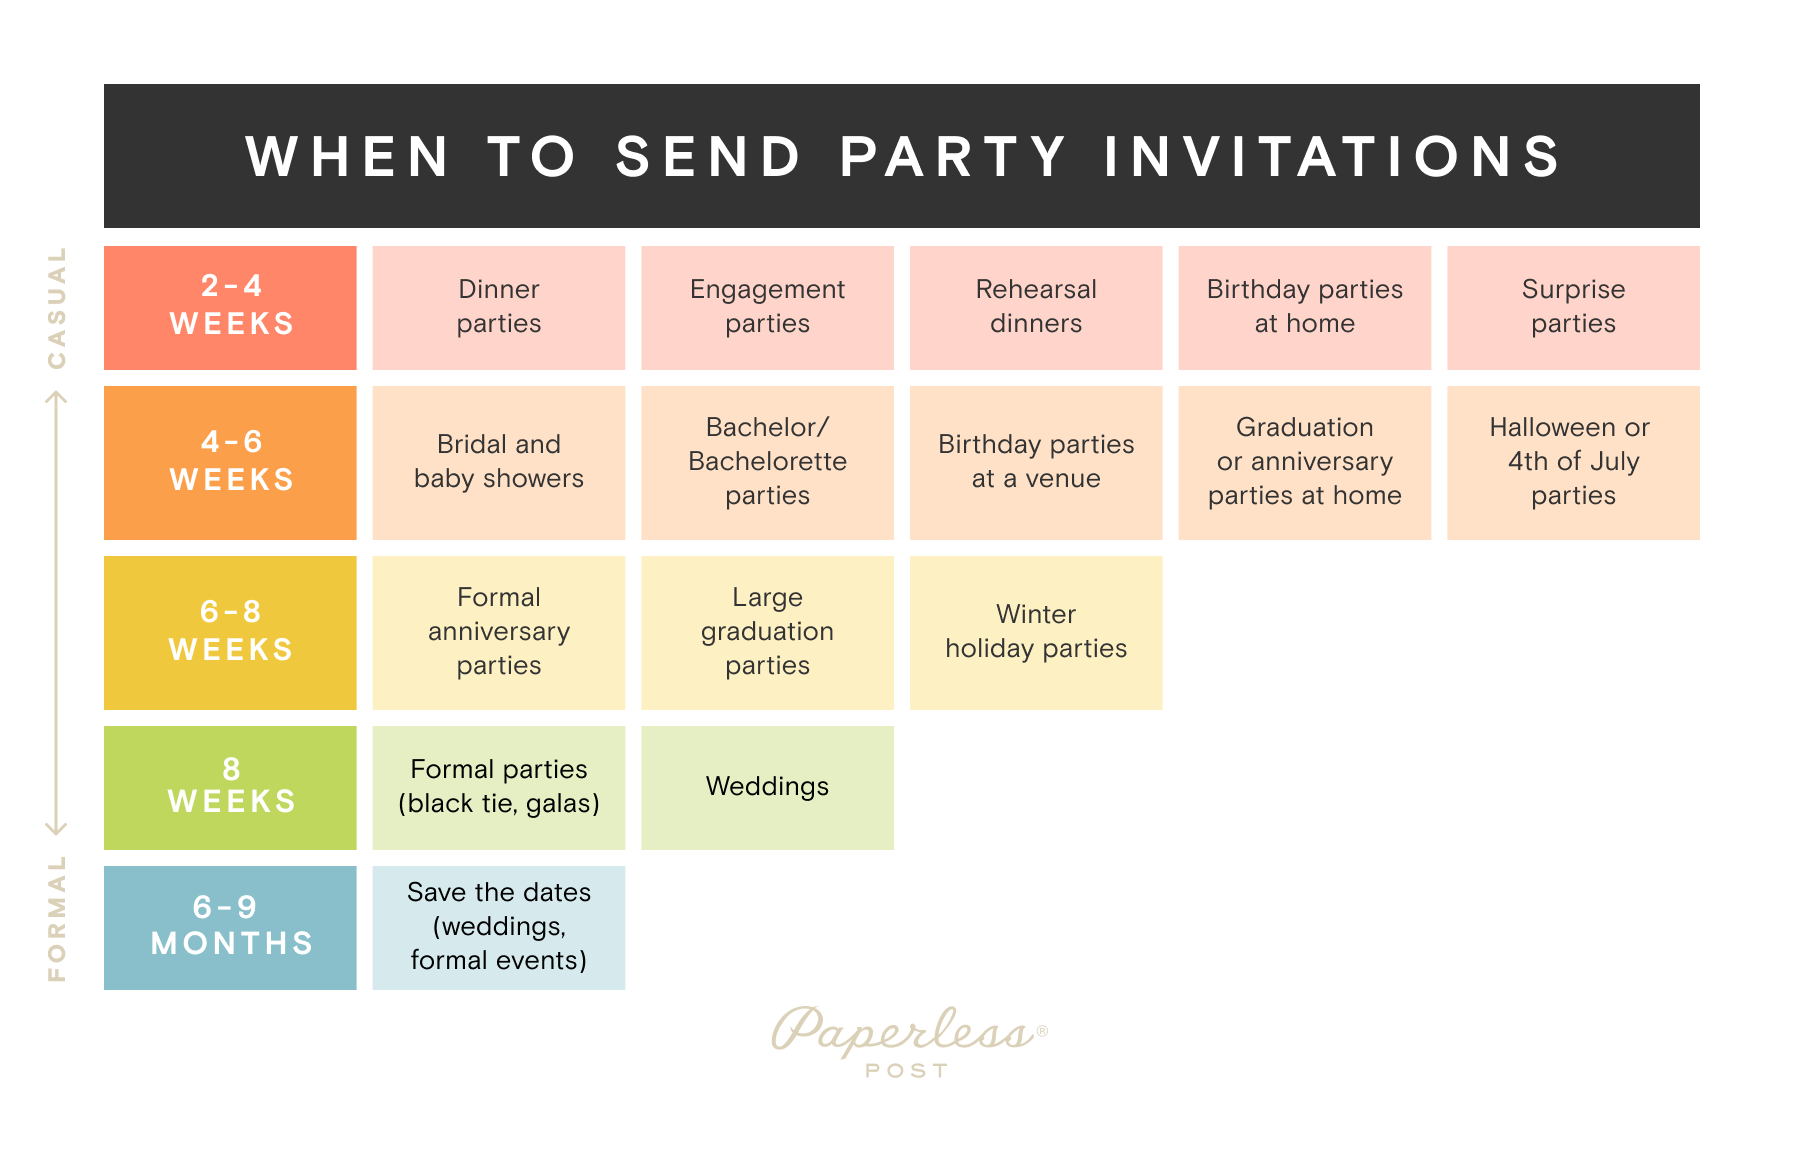 A rainbow-colored chart succinctly spells out when to send out various types of party invitations, depending on the event.